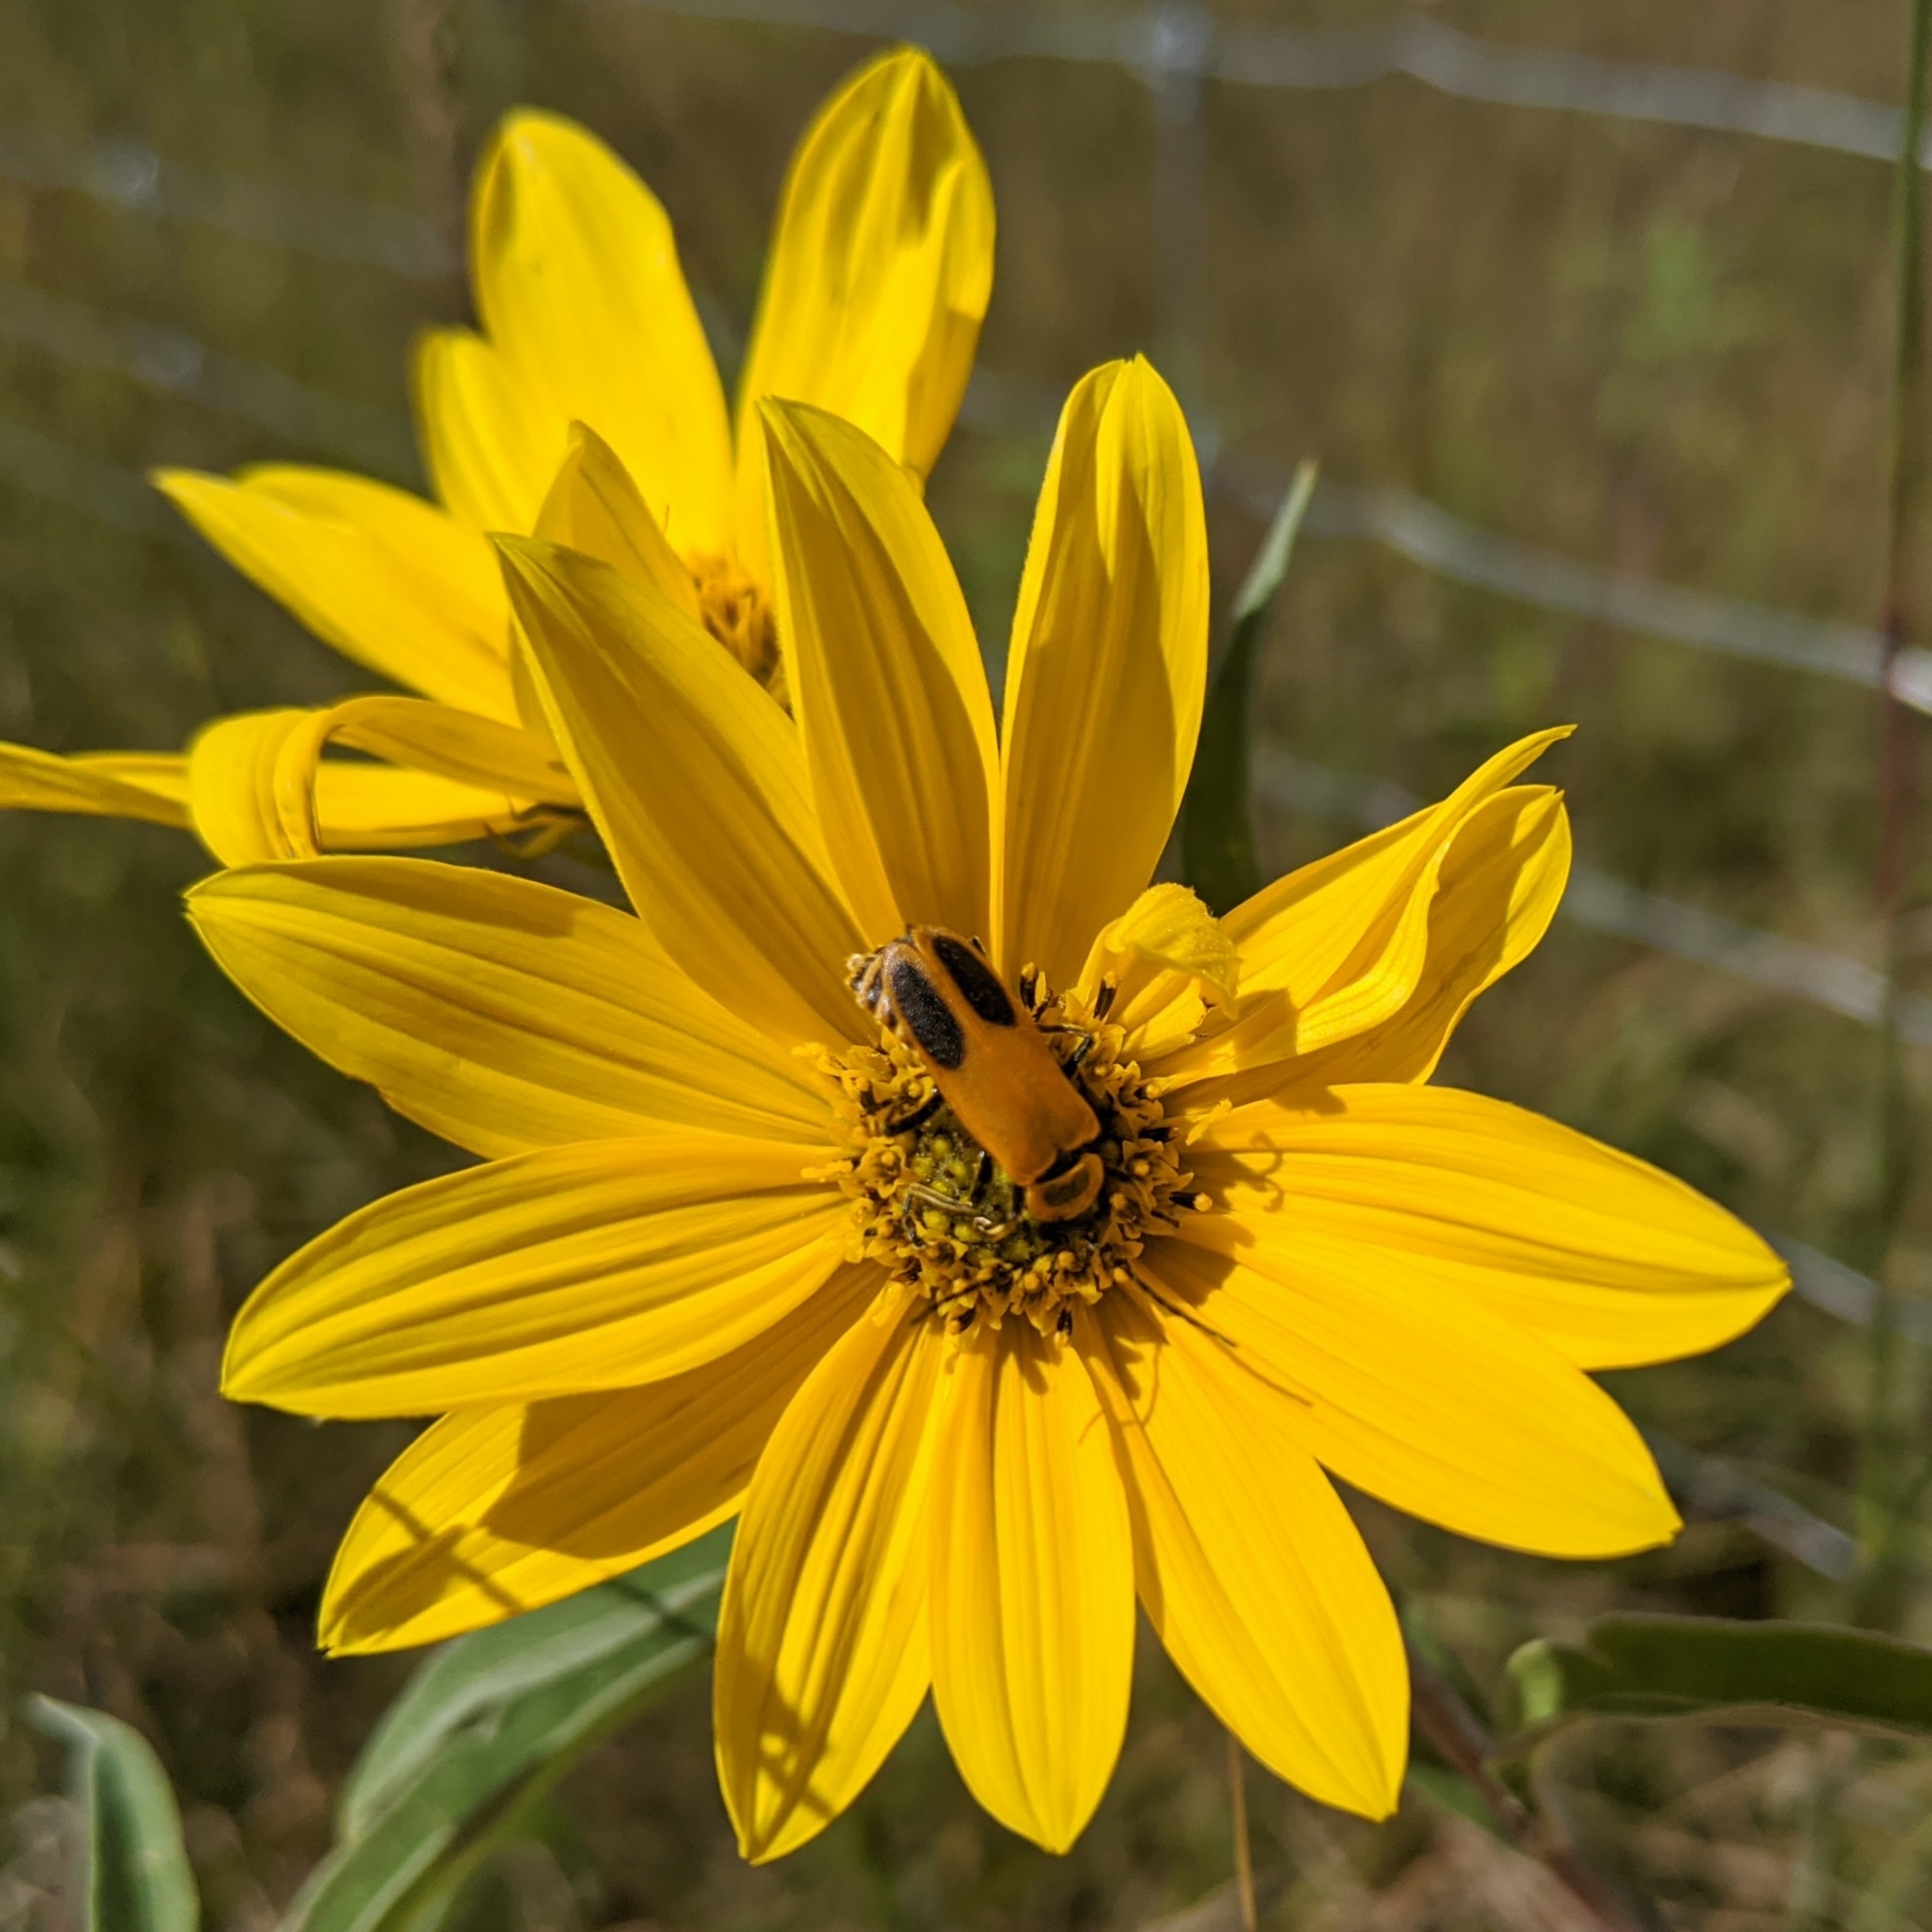 A soldier beetle on the center of a yellow daisy-like flower.